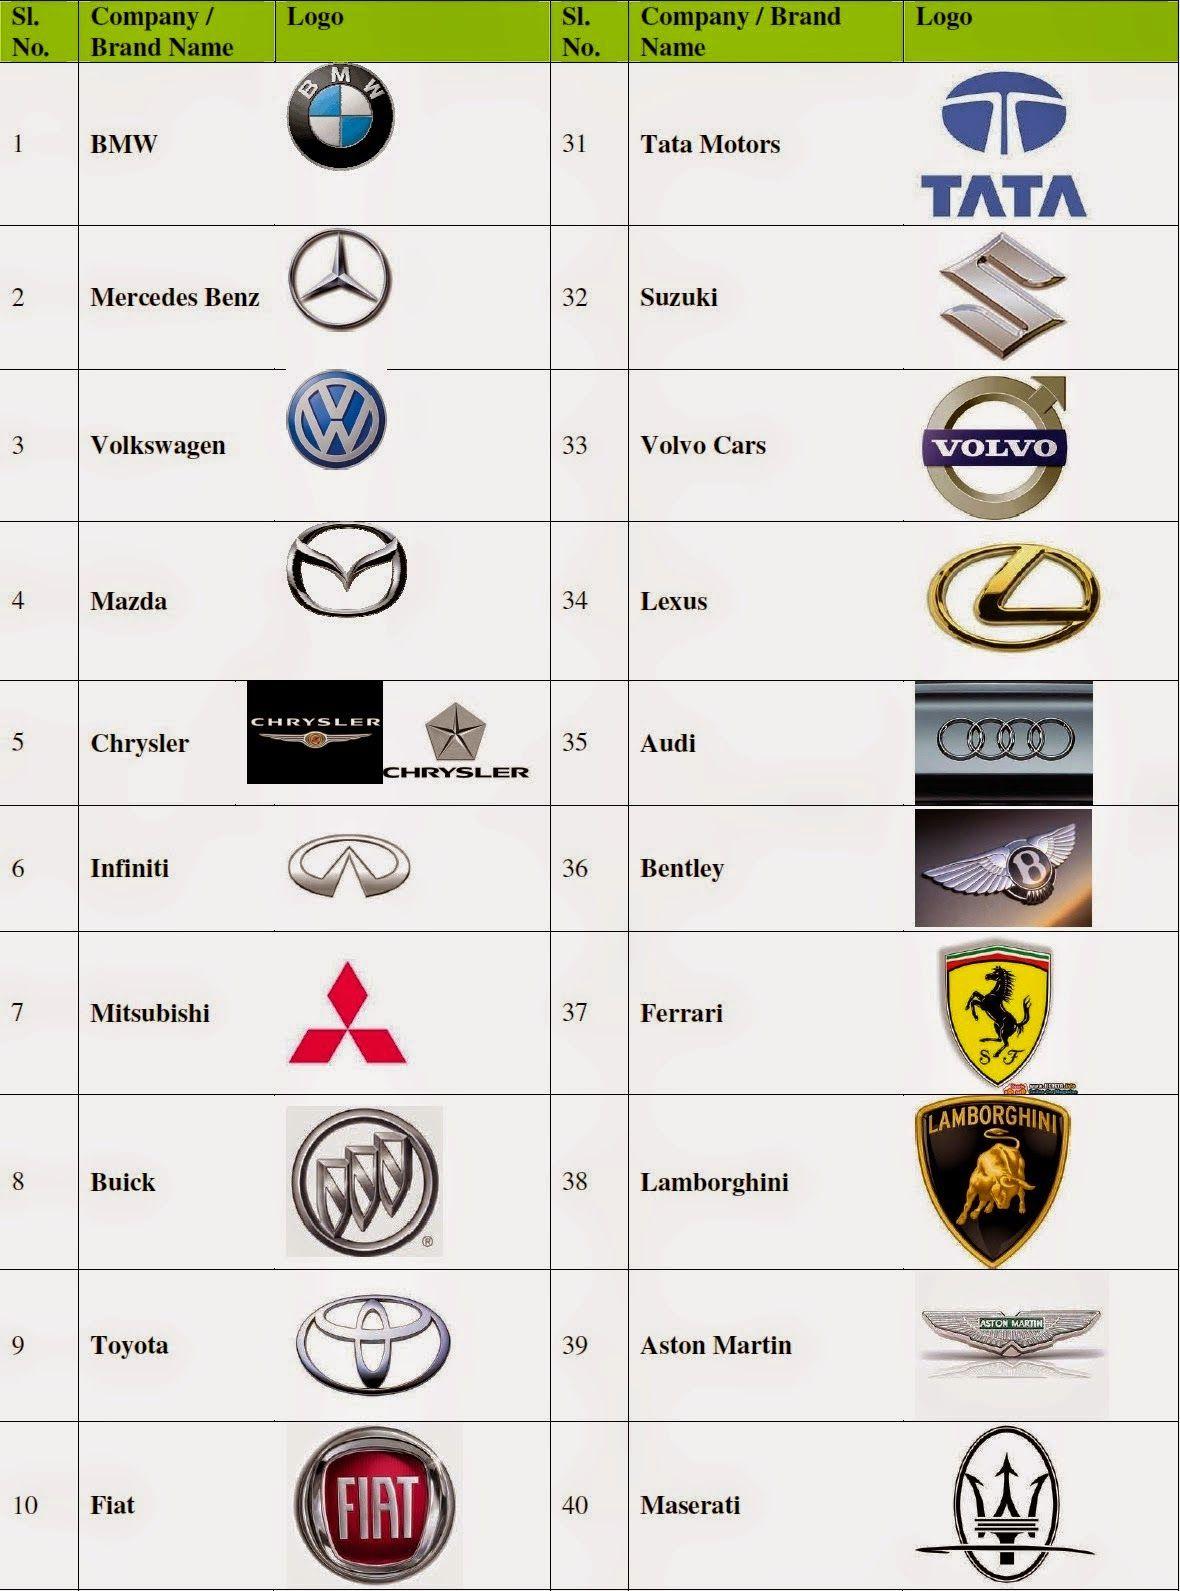 Famous Car Brand Logo - Best Cars Brands and Car Companies: Car Brand Logos of Leading Car ...